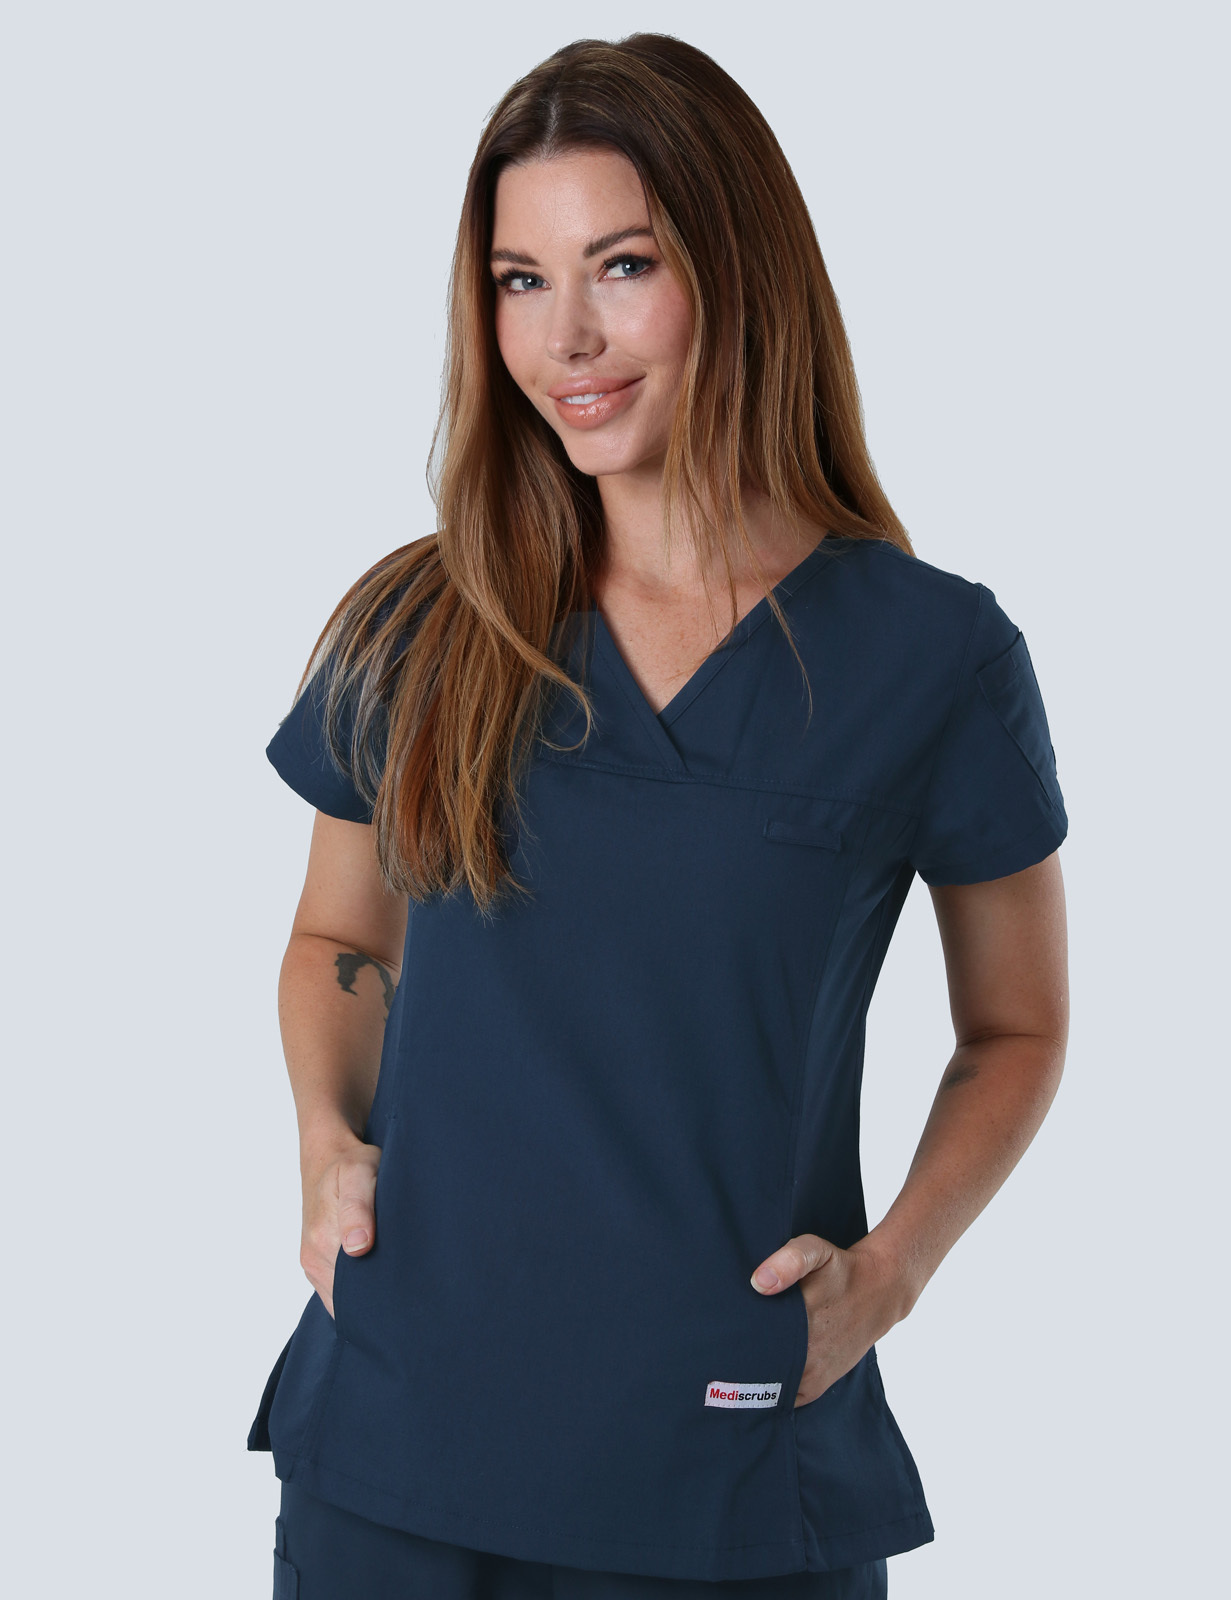 Rockhampton Hospital Special Care  Uniform Set Bndle (Women's Fit Solid Top and Cargo Pants in Navy + Logos)